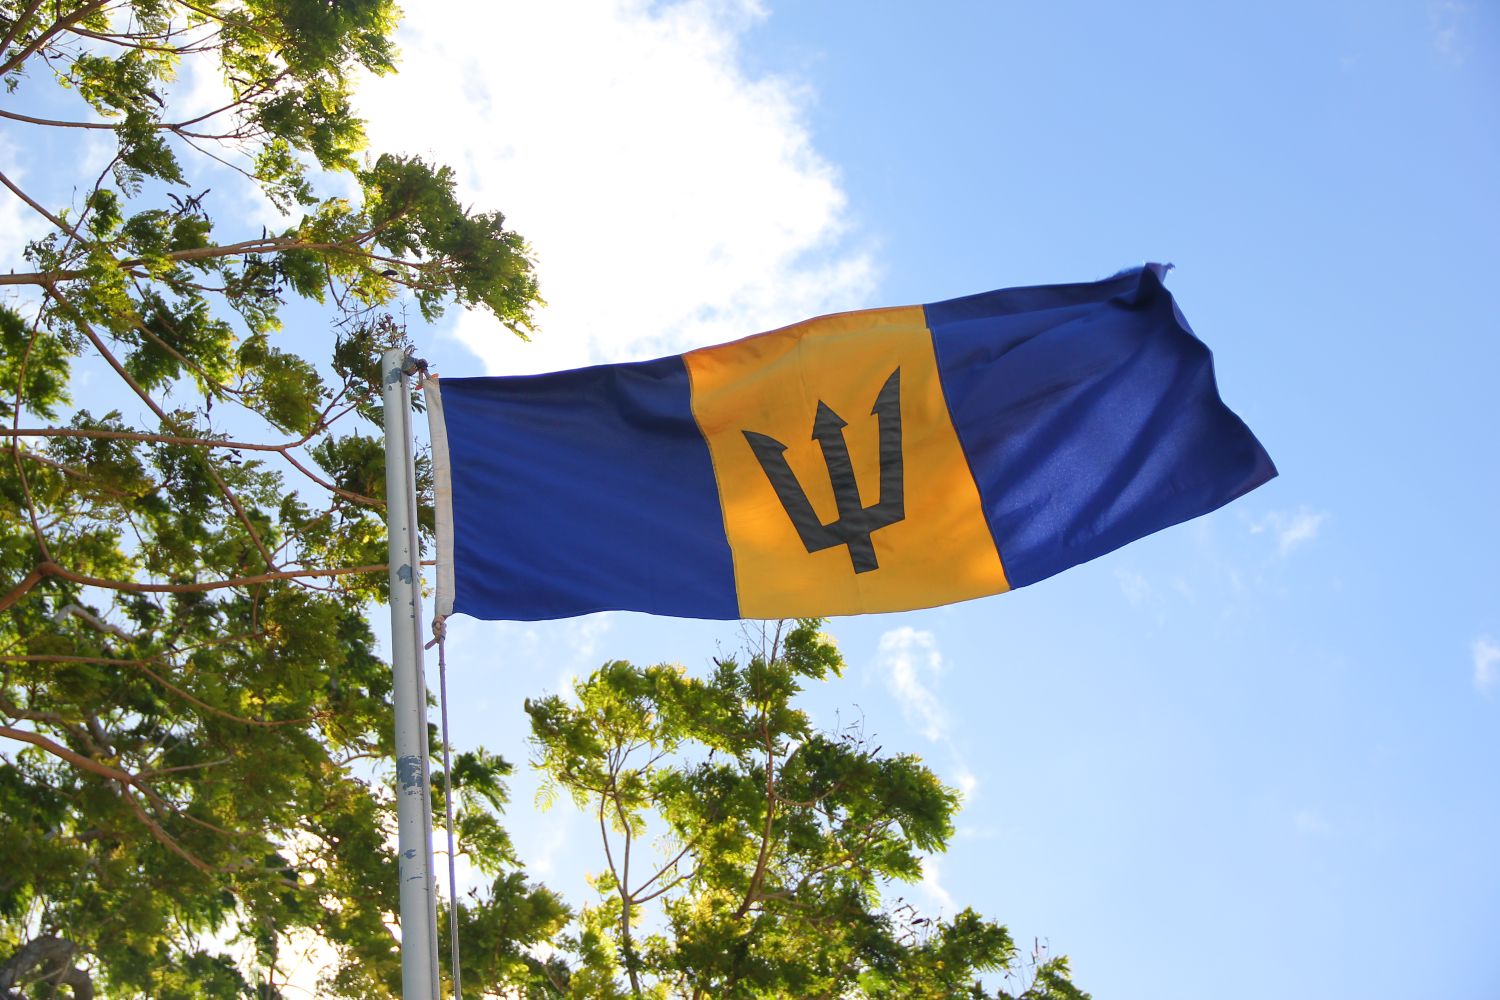 Join the Independence Celebrations in Barbados